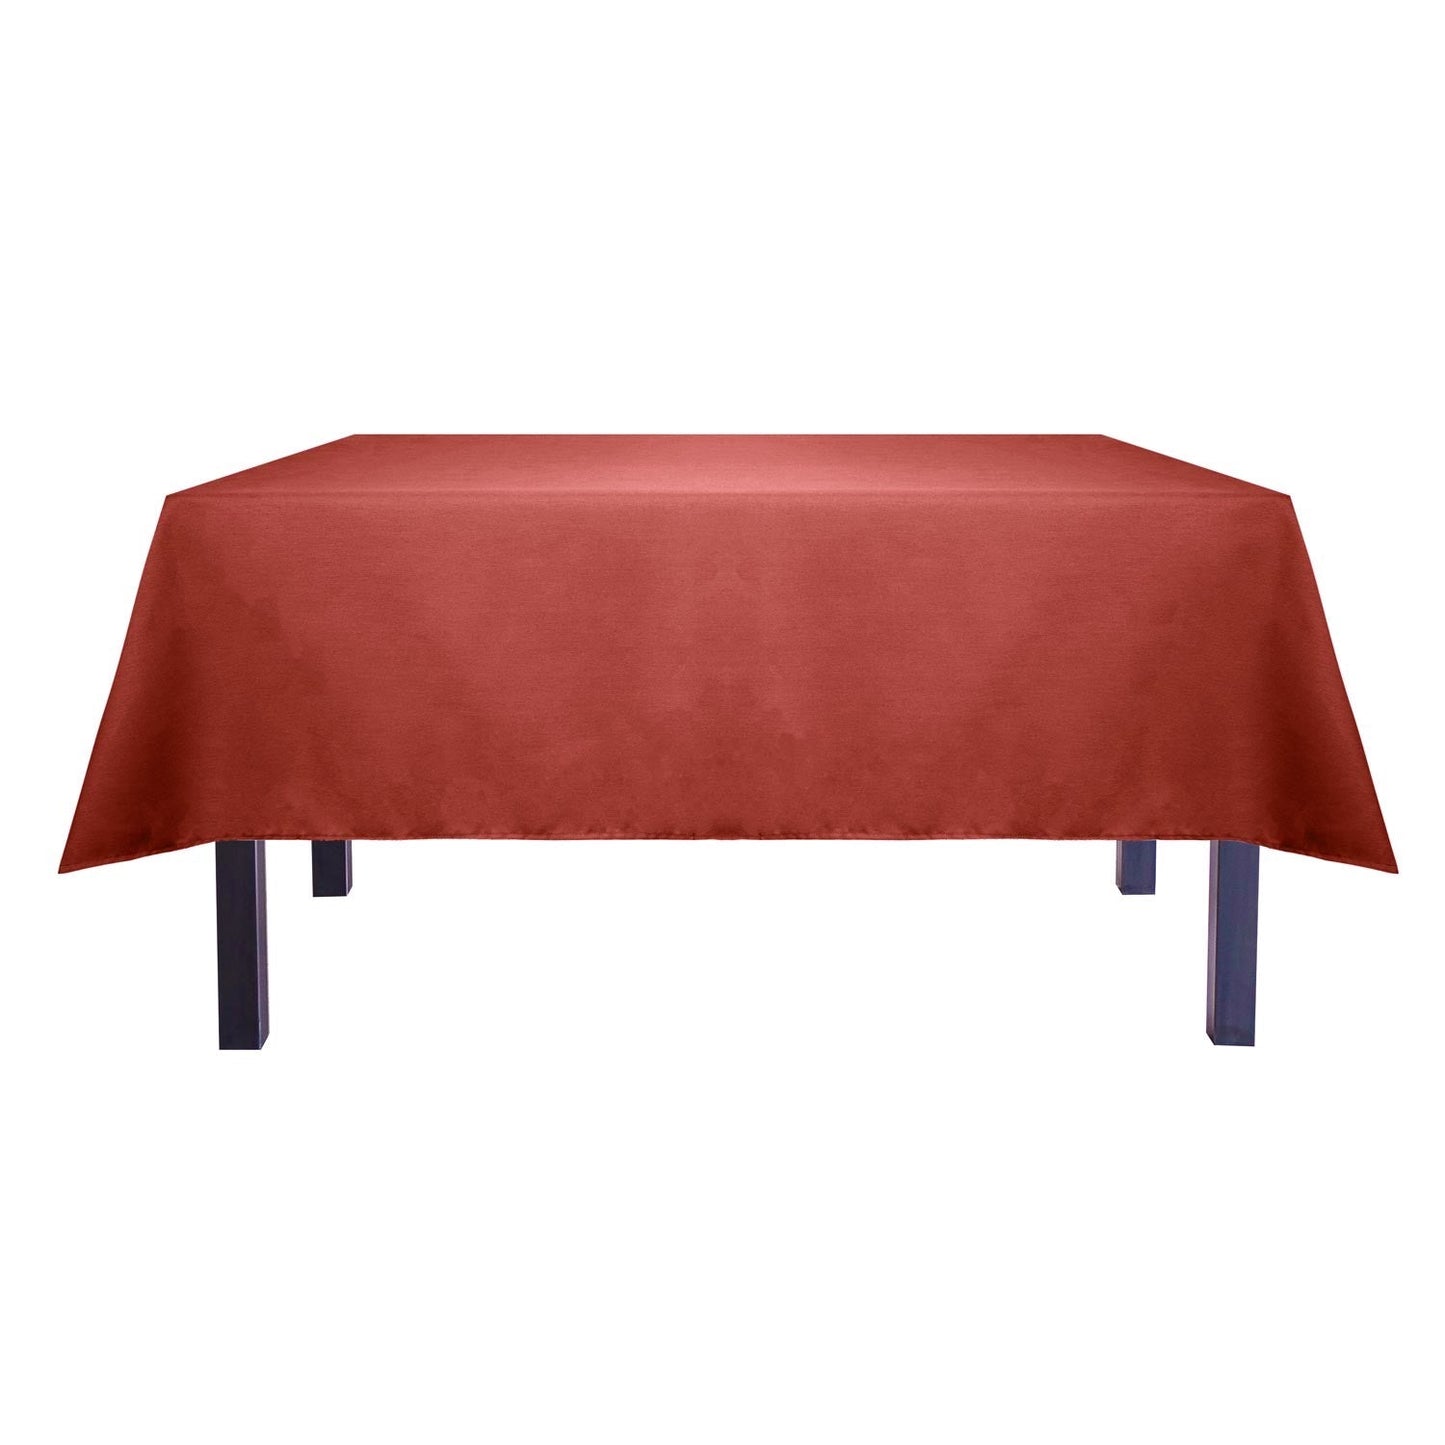 American Dawn | 52X90 Inch Milliken Signature Red Tablecloth 